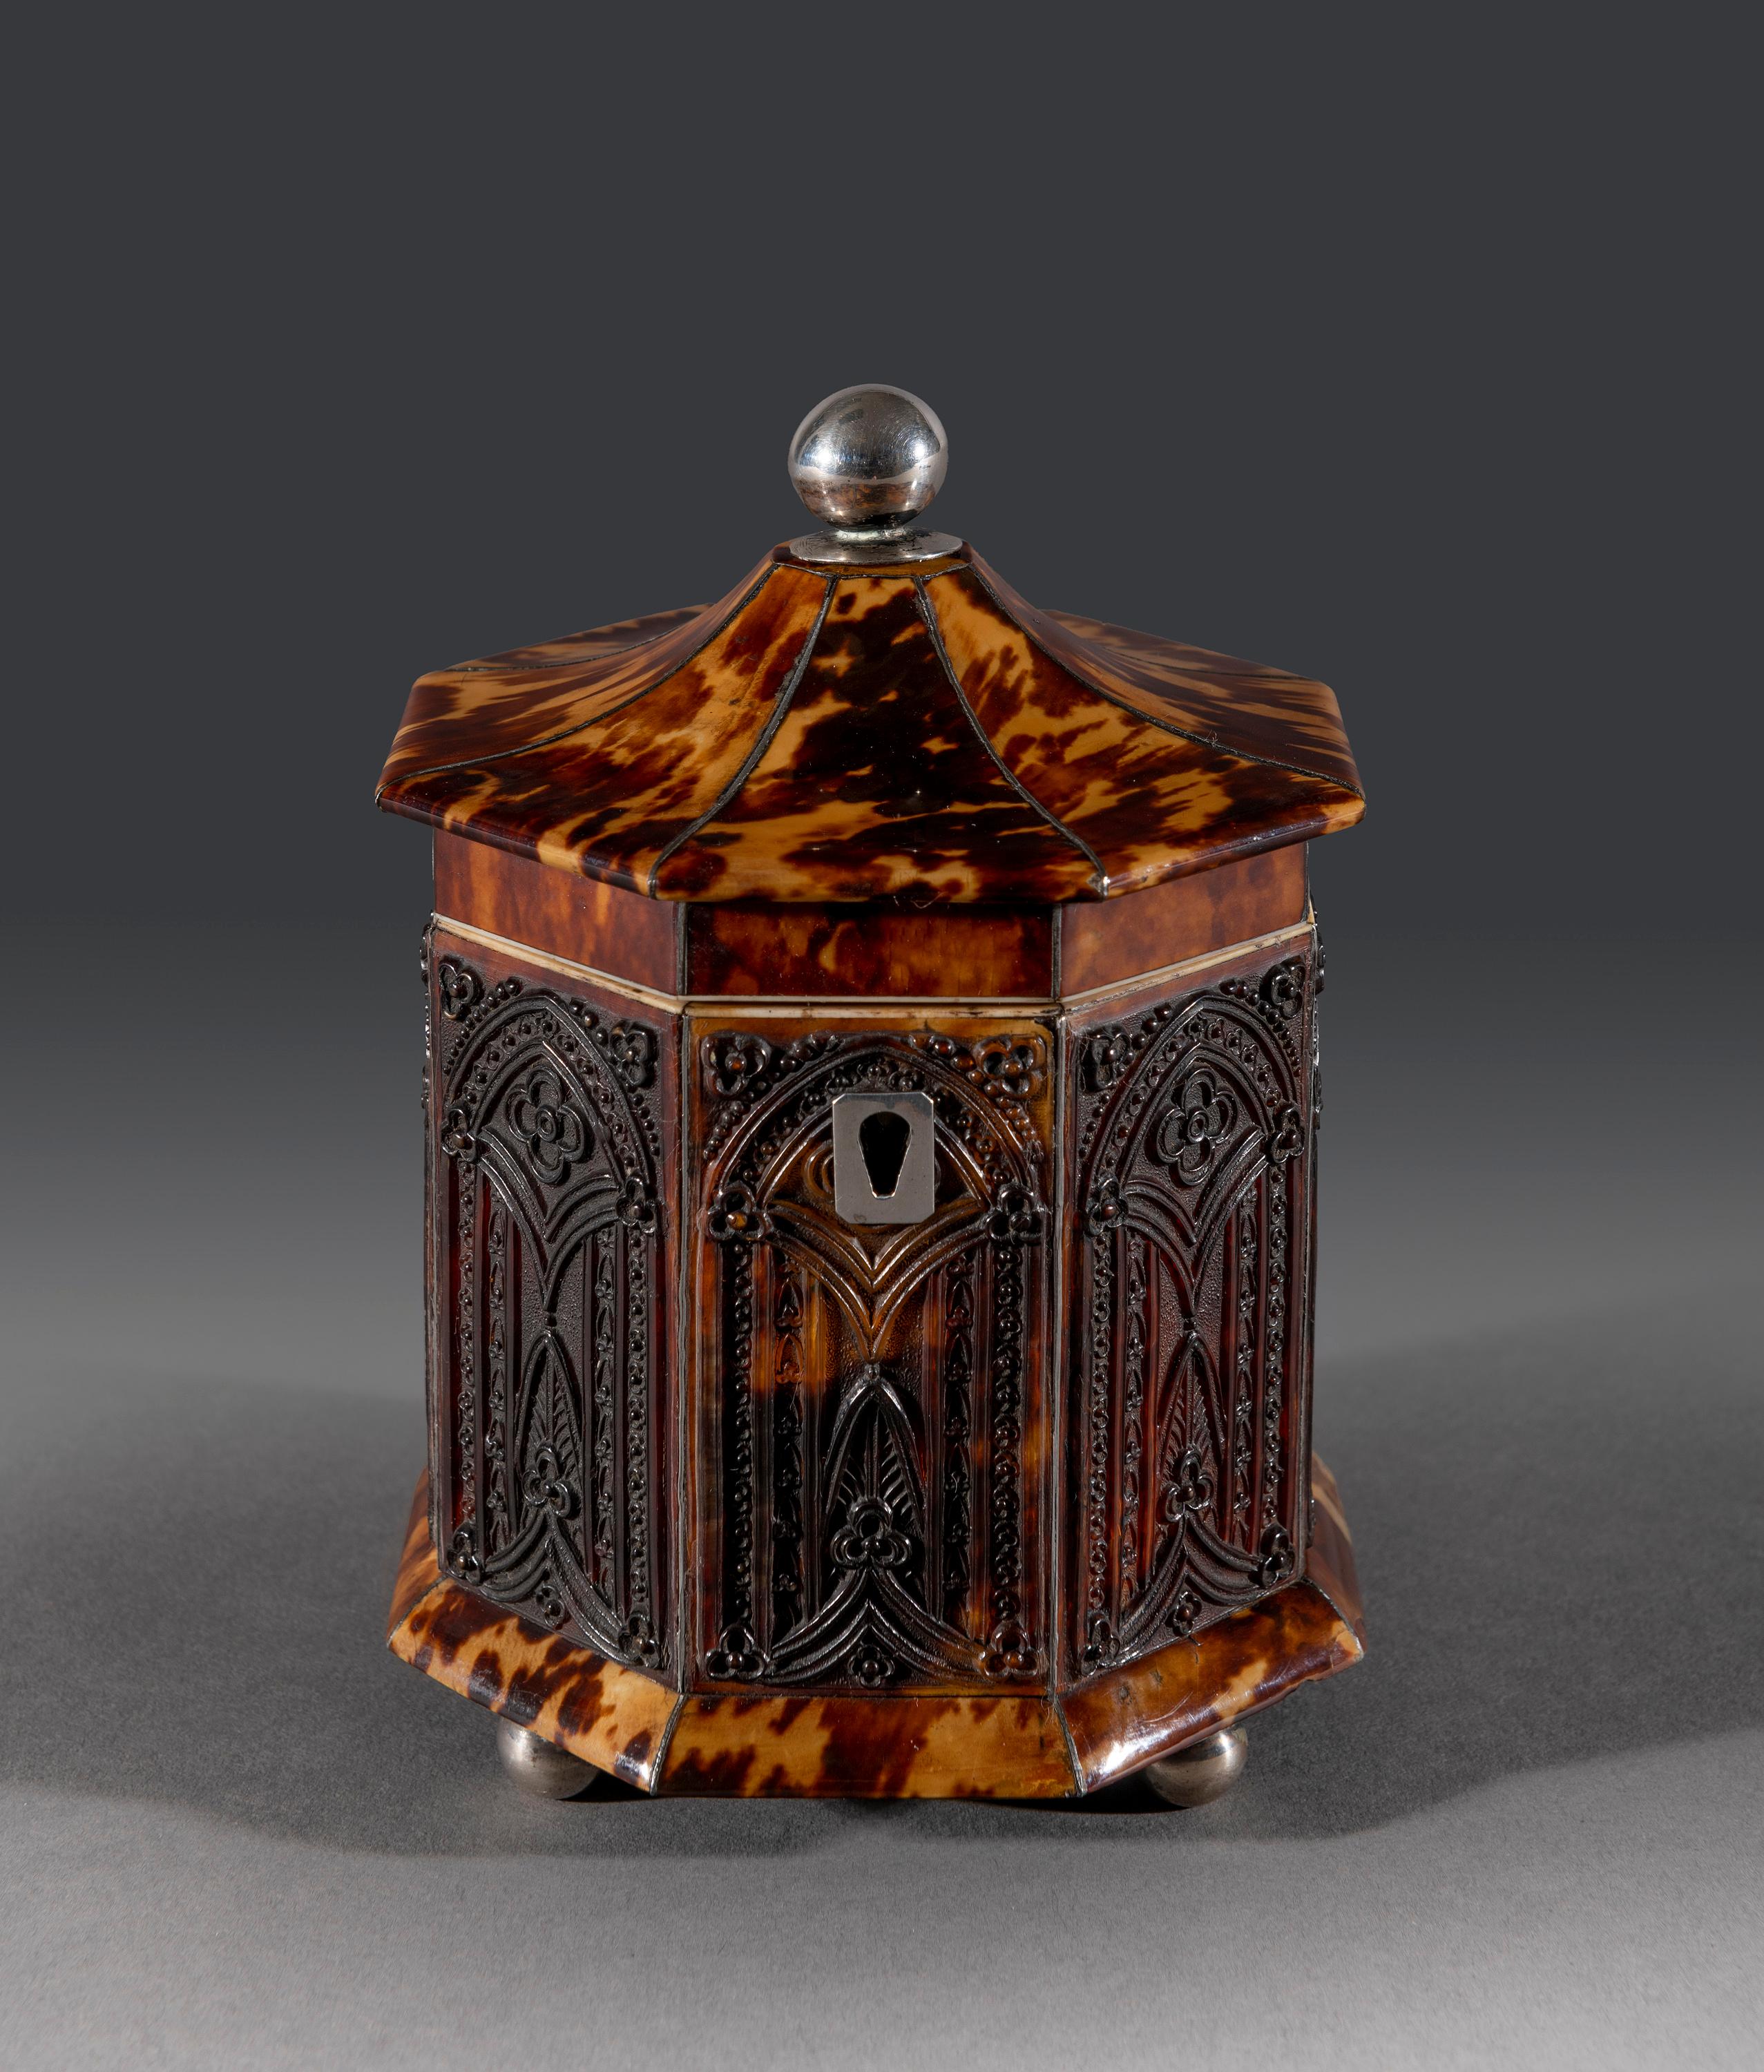 The small octagonal tortoiseshell caddy has a silver ball finial and escutcheon with octagonal pressed Gothic arches to each side separated with silver stringing. The caddy sits on four silver ball feet. The top opens to reveal a single bore handle